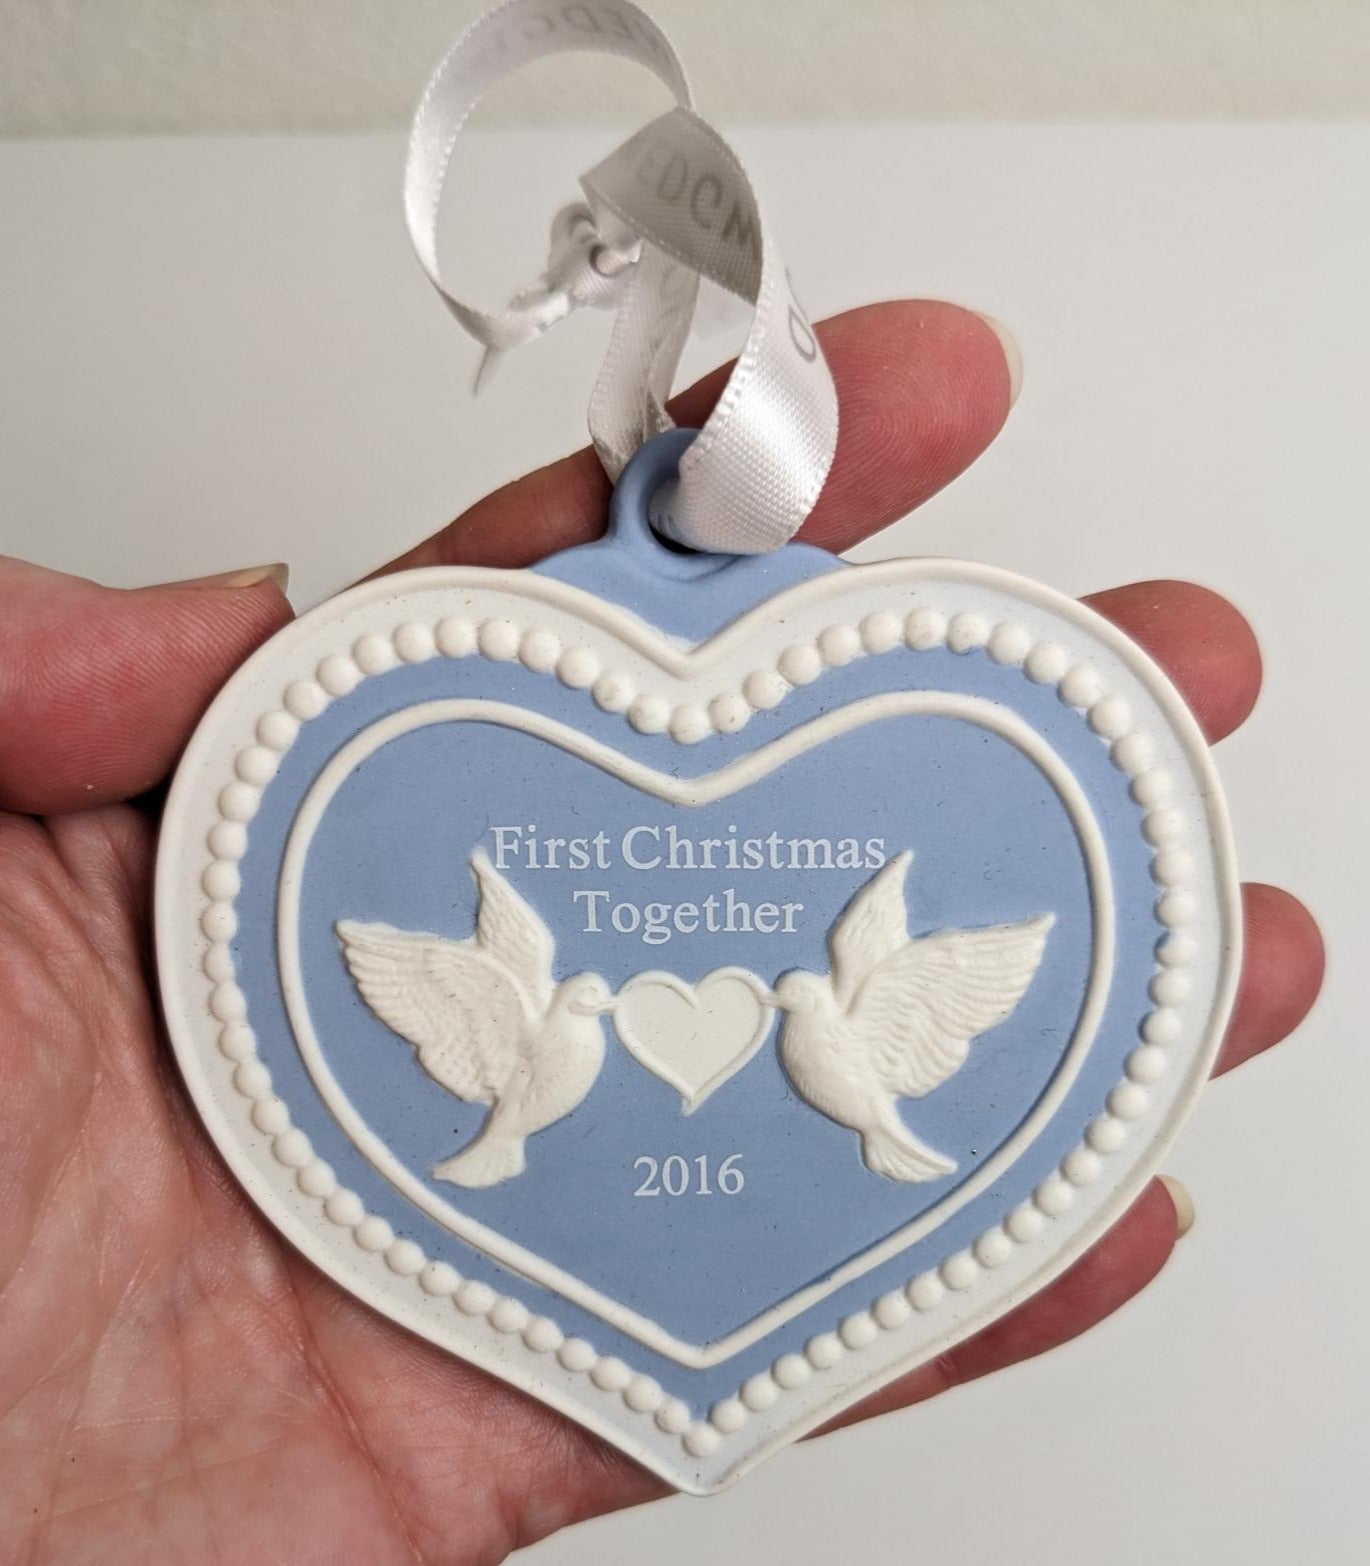 Wedgwood Heart 2016 First Christmas Together Ornament